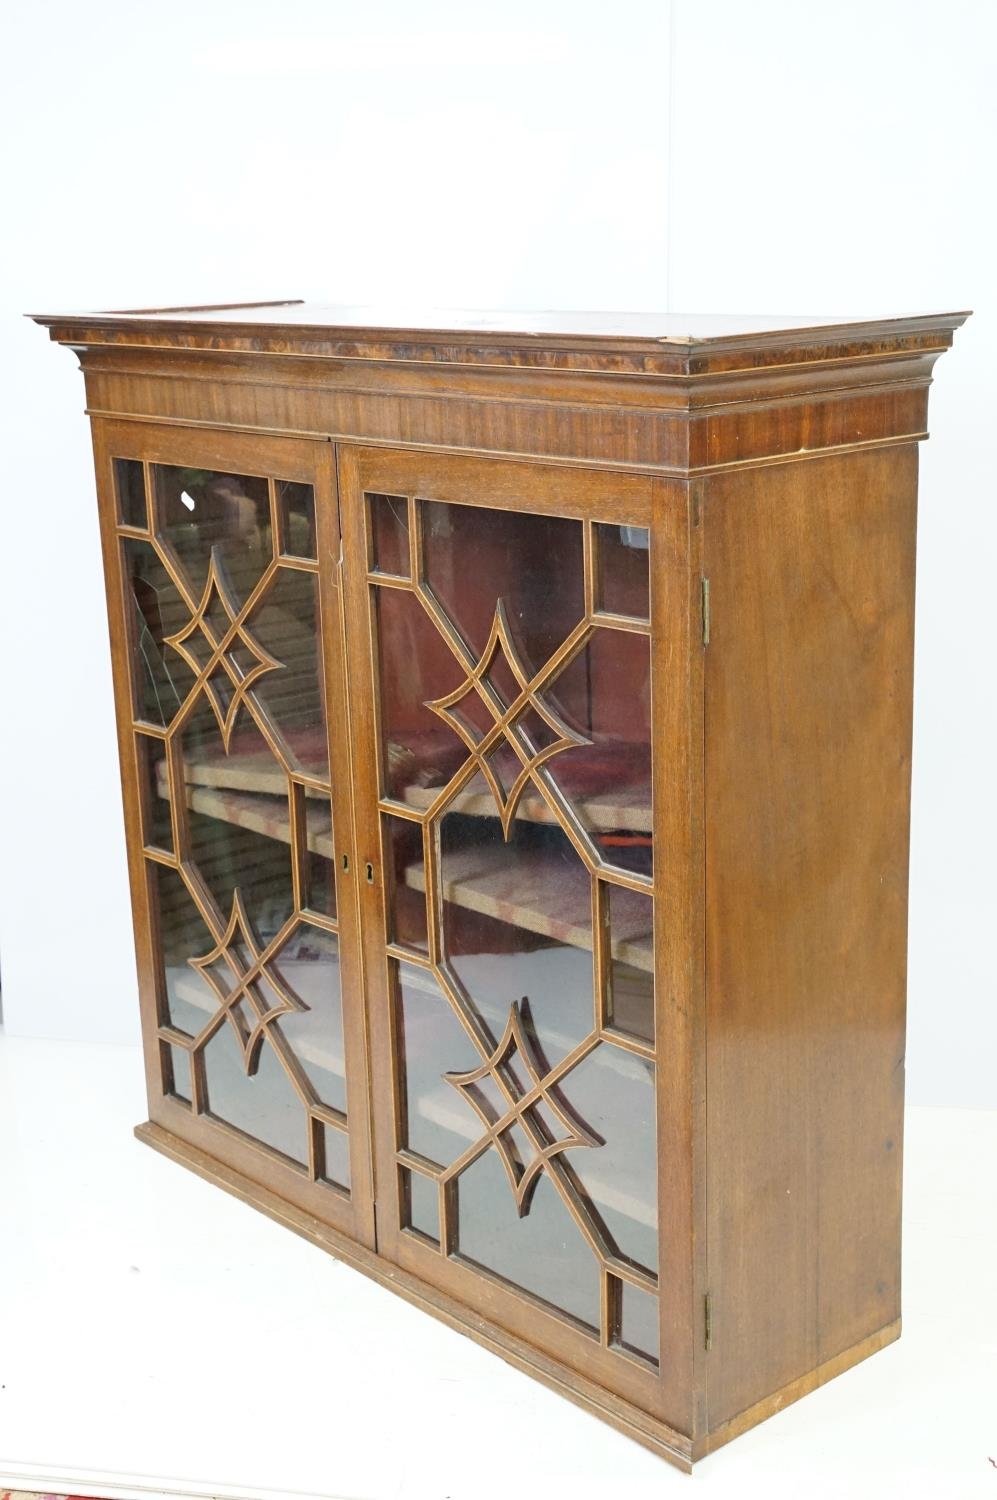 20th century mahogany astragal glazed two door display cabinet fitted with three shelves, 107cm high - Image 9 of 10